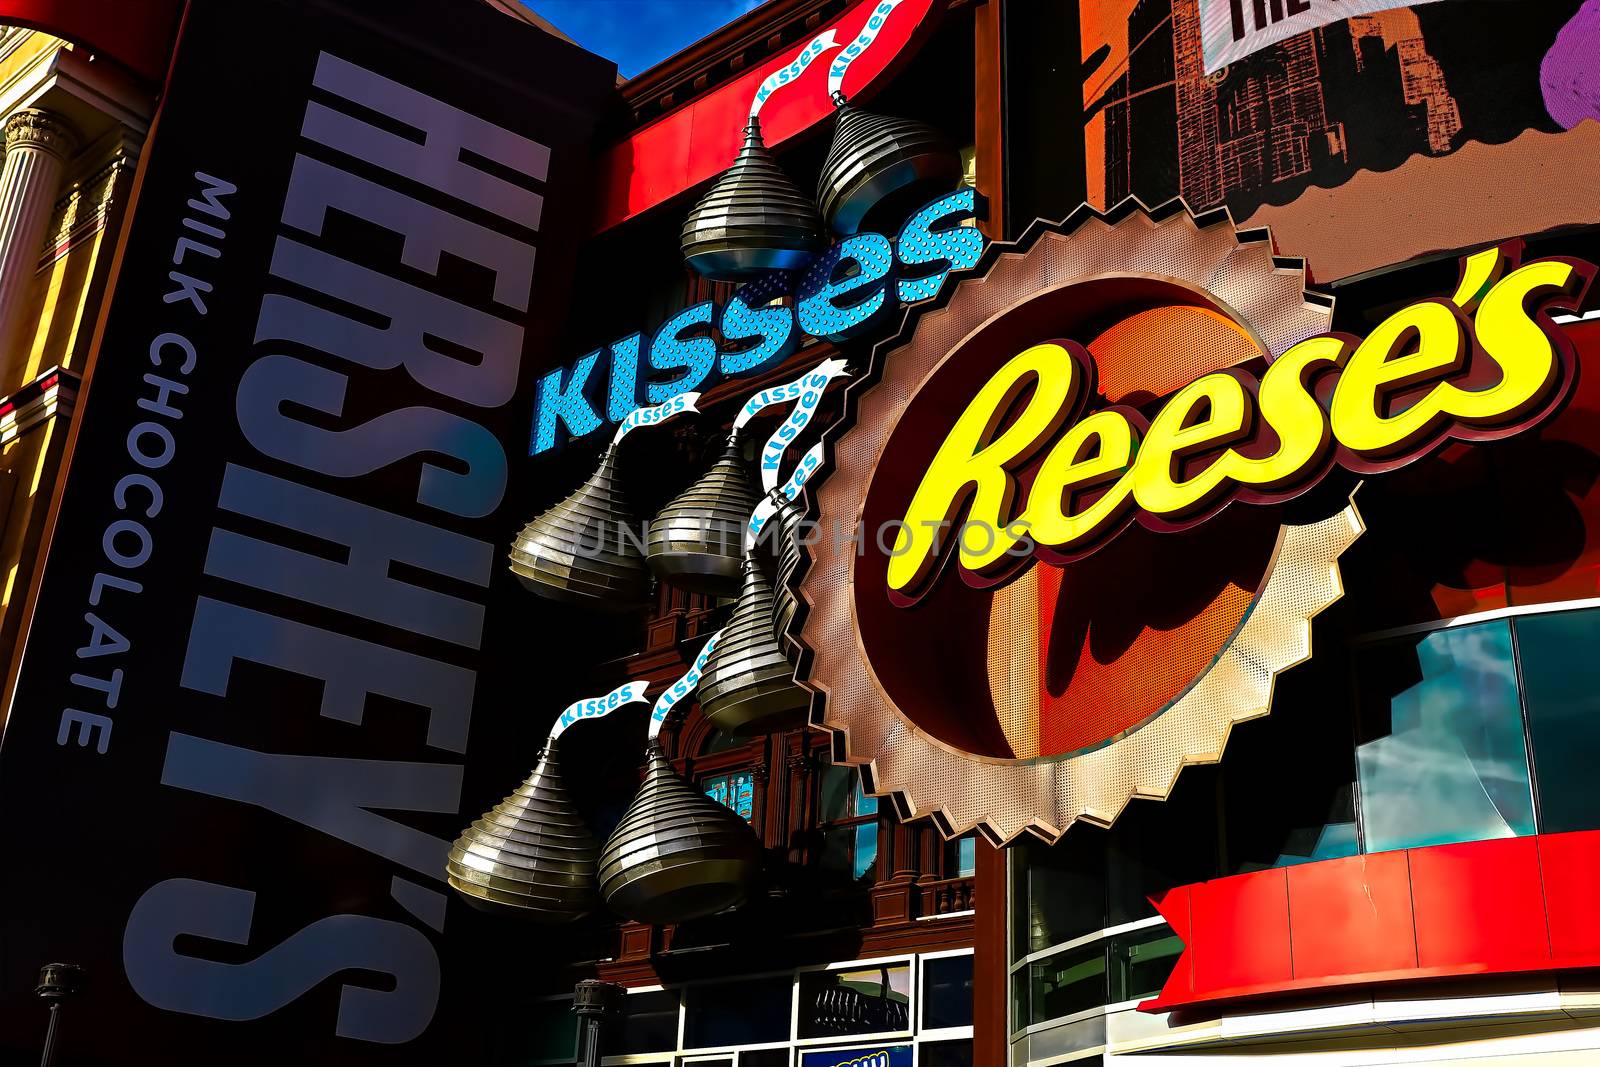 Las Vegas, NV/USA - Oct 09, 2016 : Exterior of the Hershey's Chocolate World in Las Vegas. The 13,000 sq ft store has over 800 different chocolates. by USA-TARO